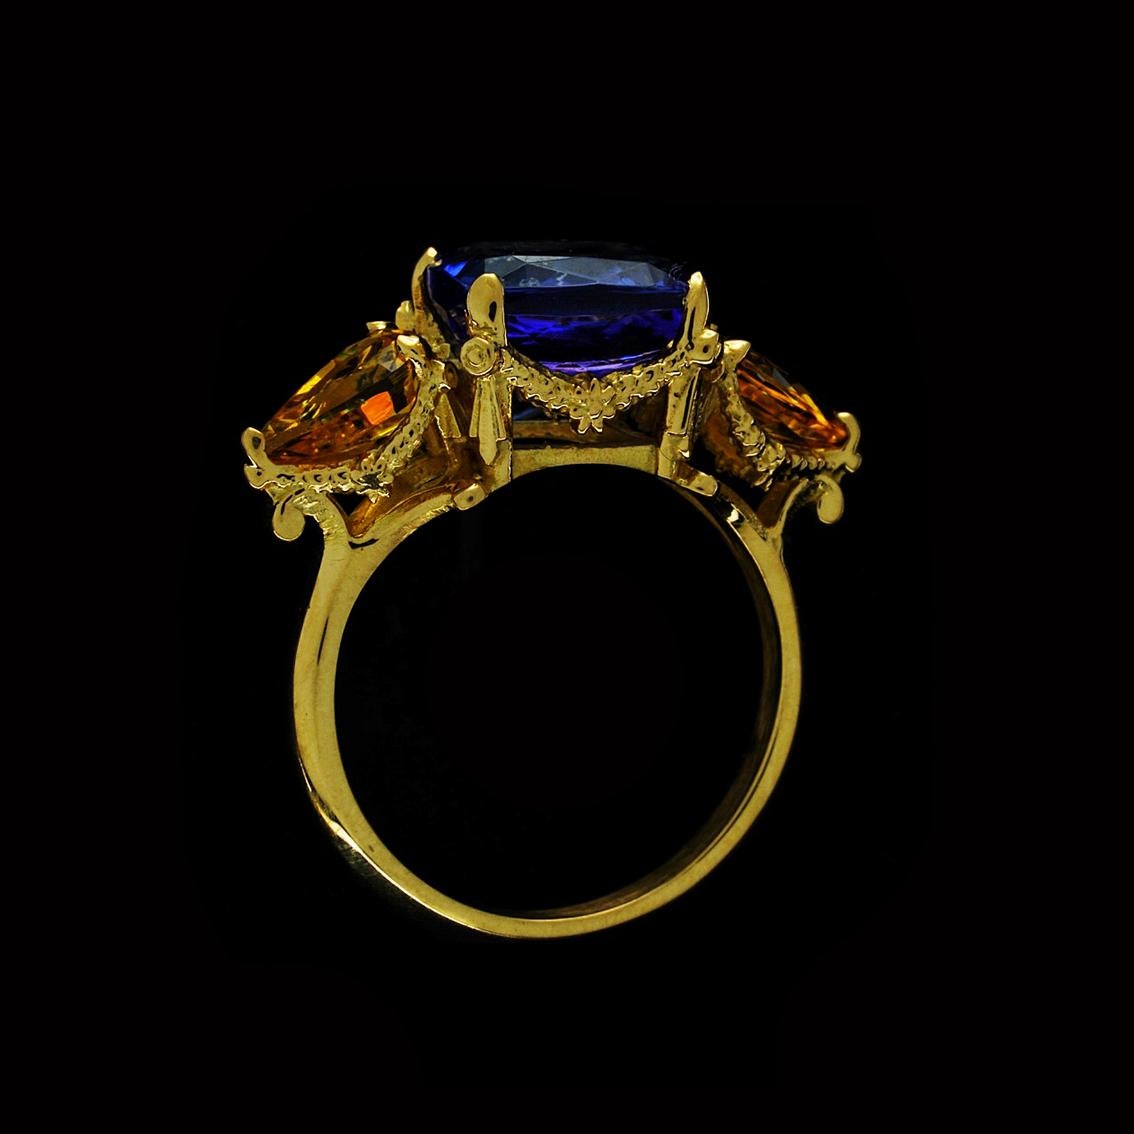 The Tanzanite and Yellow sapphire ring is a breathtaking, one of a kind piece and fits a size 7 3/4 (Australian & British size P 1/2).

Handcrafted in 18kt yellow gold, this divine ring features a central faceted 4.1 carat tanzanite, an